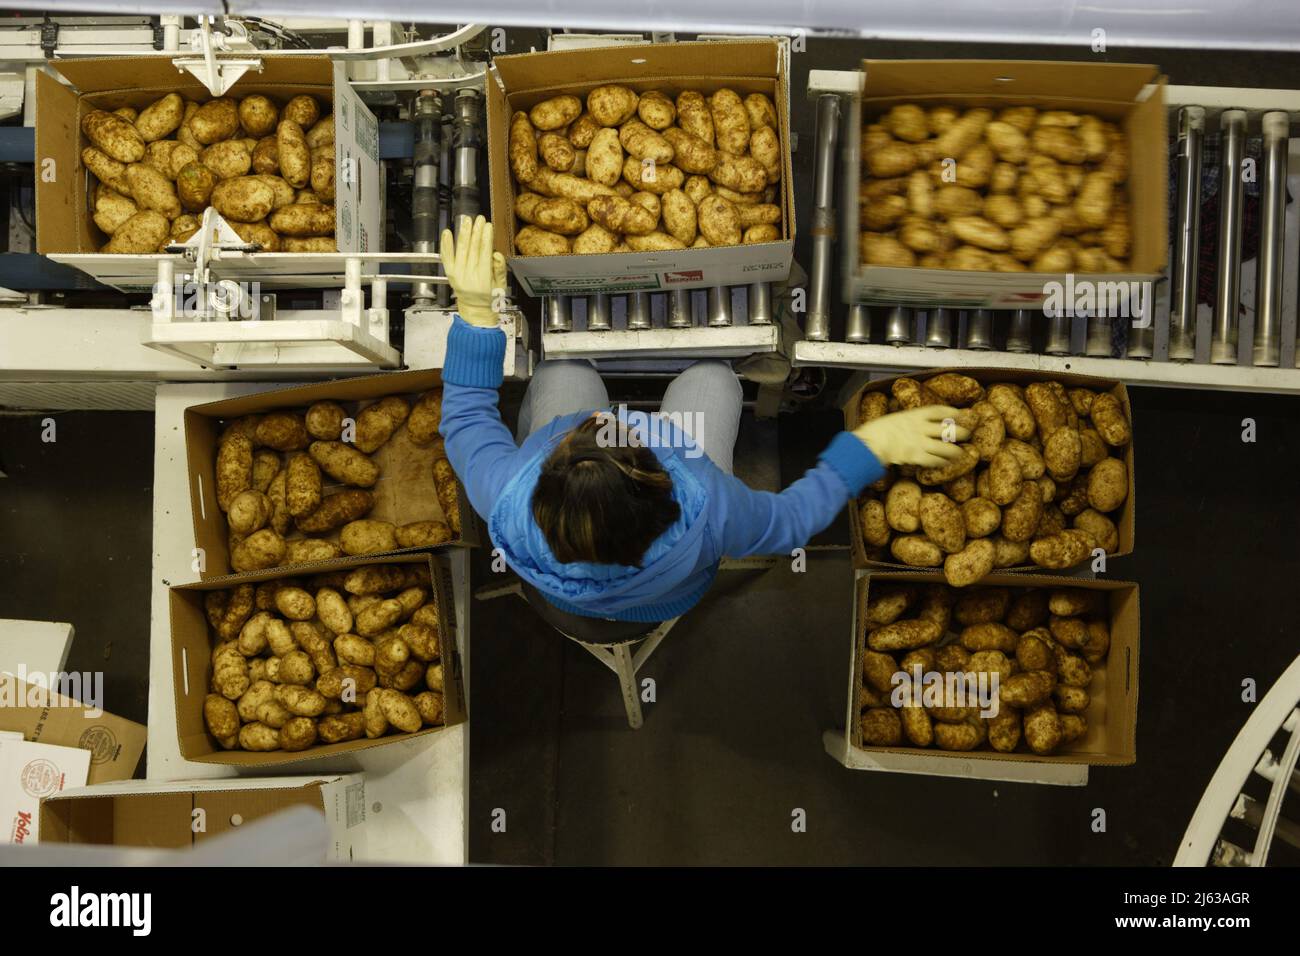 American Falls, Idaho, USA Apr. 30, 2011 Image of a conveyor belt in a food processing facility, and workers sorting russett potatoes. Stock Photo